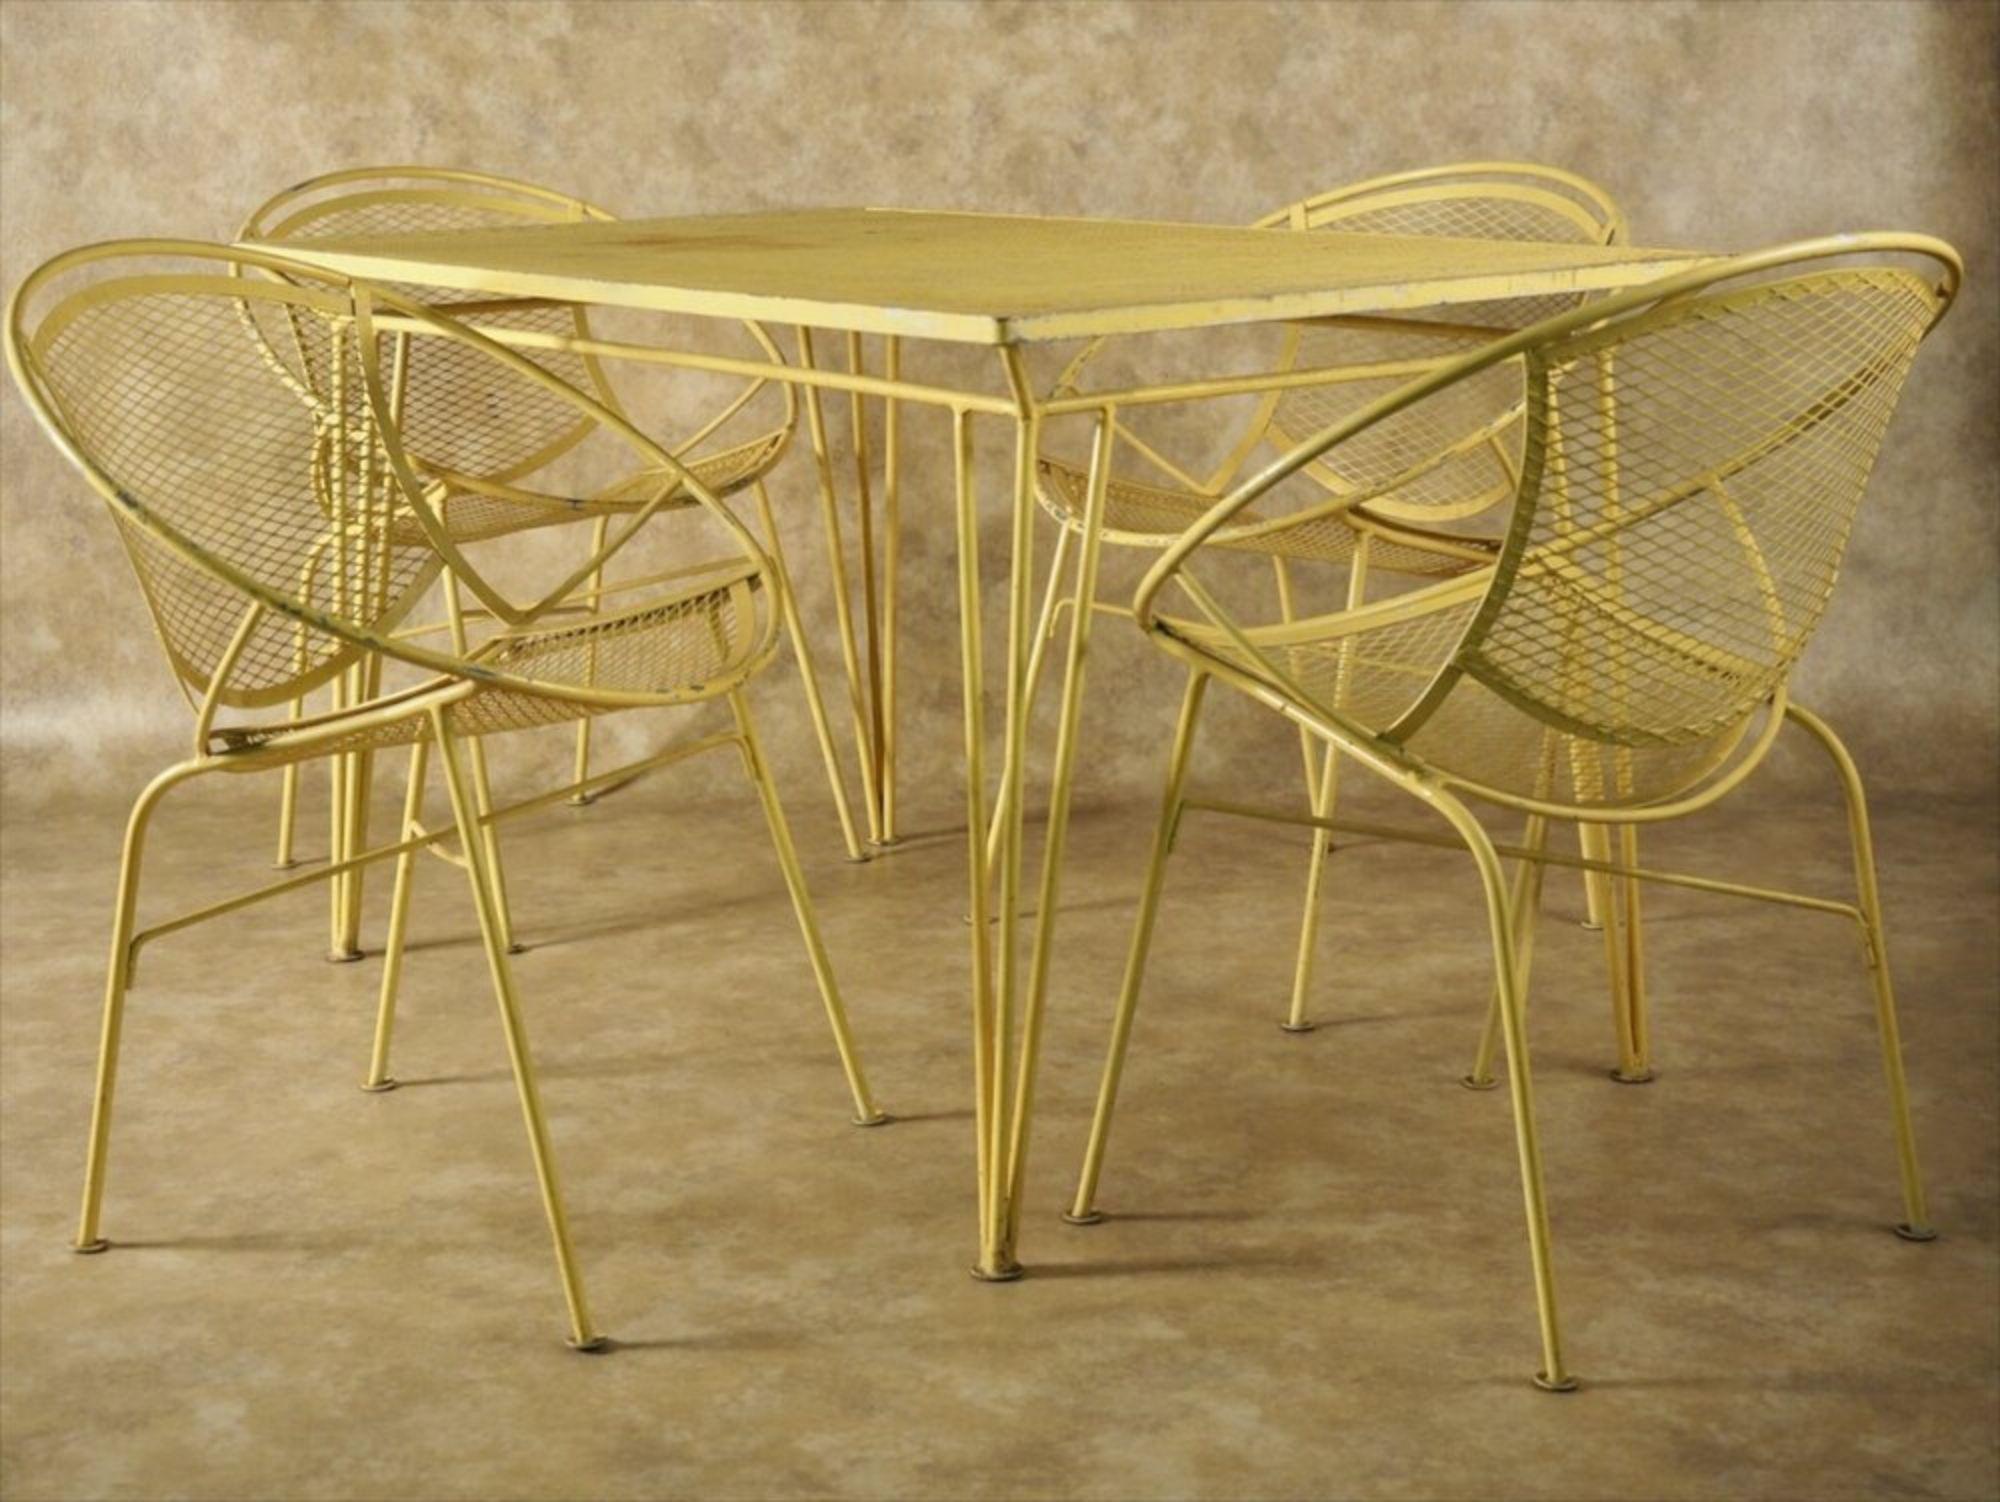 Mid-Century Modern dining table and four chairs in painted iron, by Salterini, circa 1960. Original yellow!

Measures: Table 48” wide x 30” deep x 28” high.

Chairs 25” wide x 21” deep x 30” high.